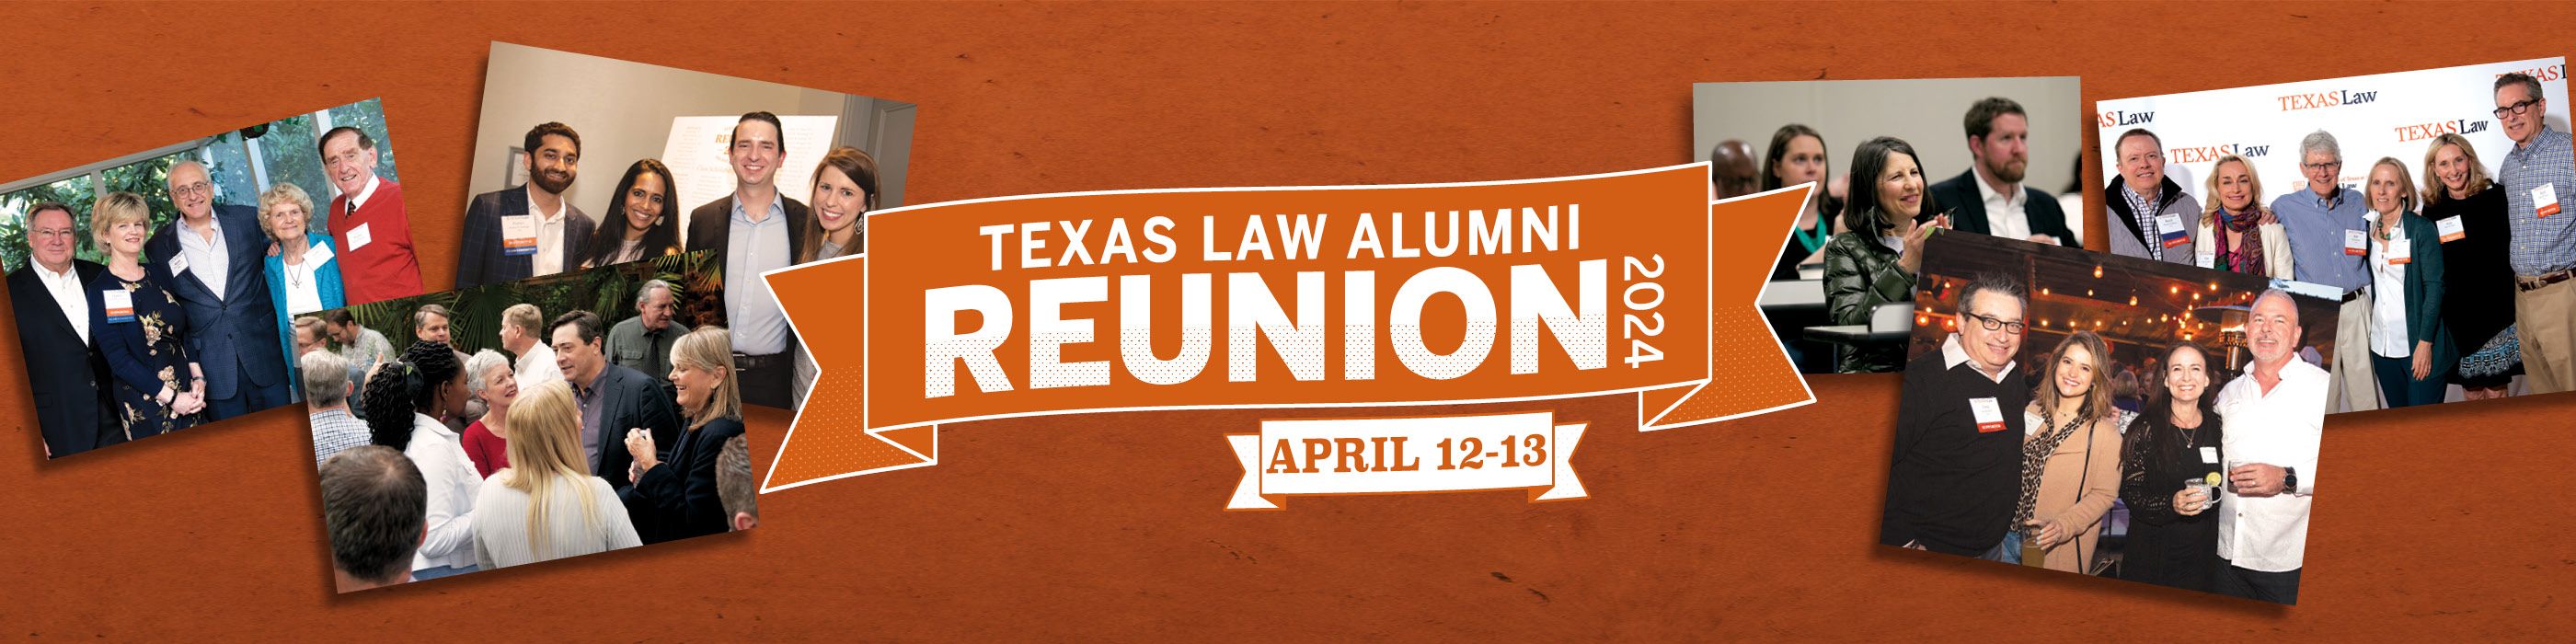 Texas Law Class of 2004